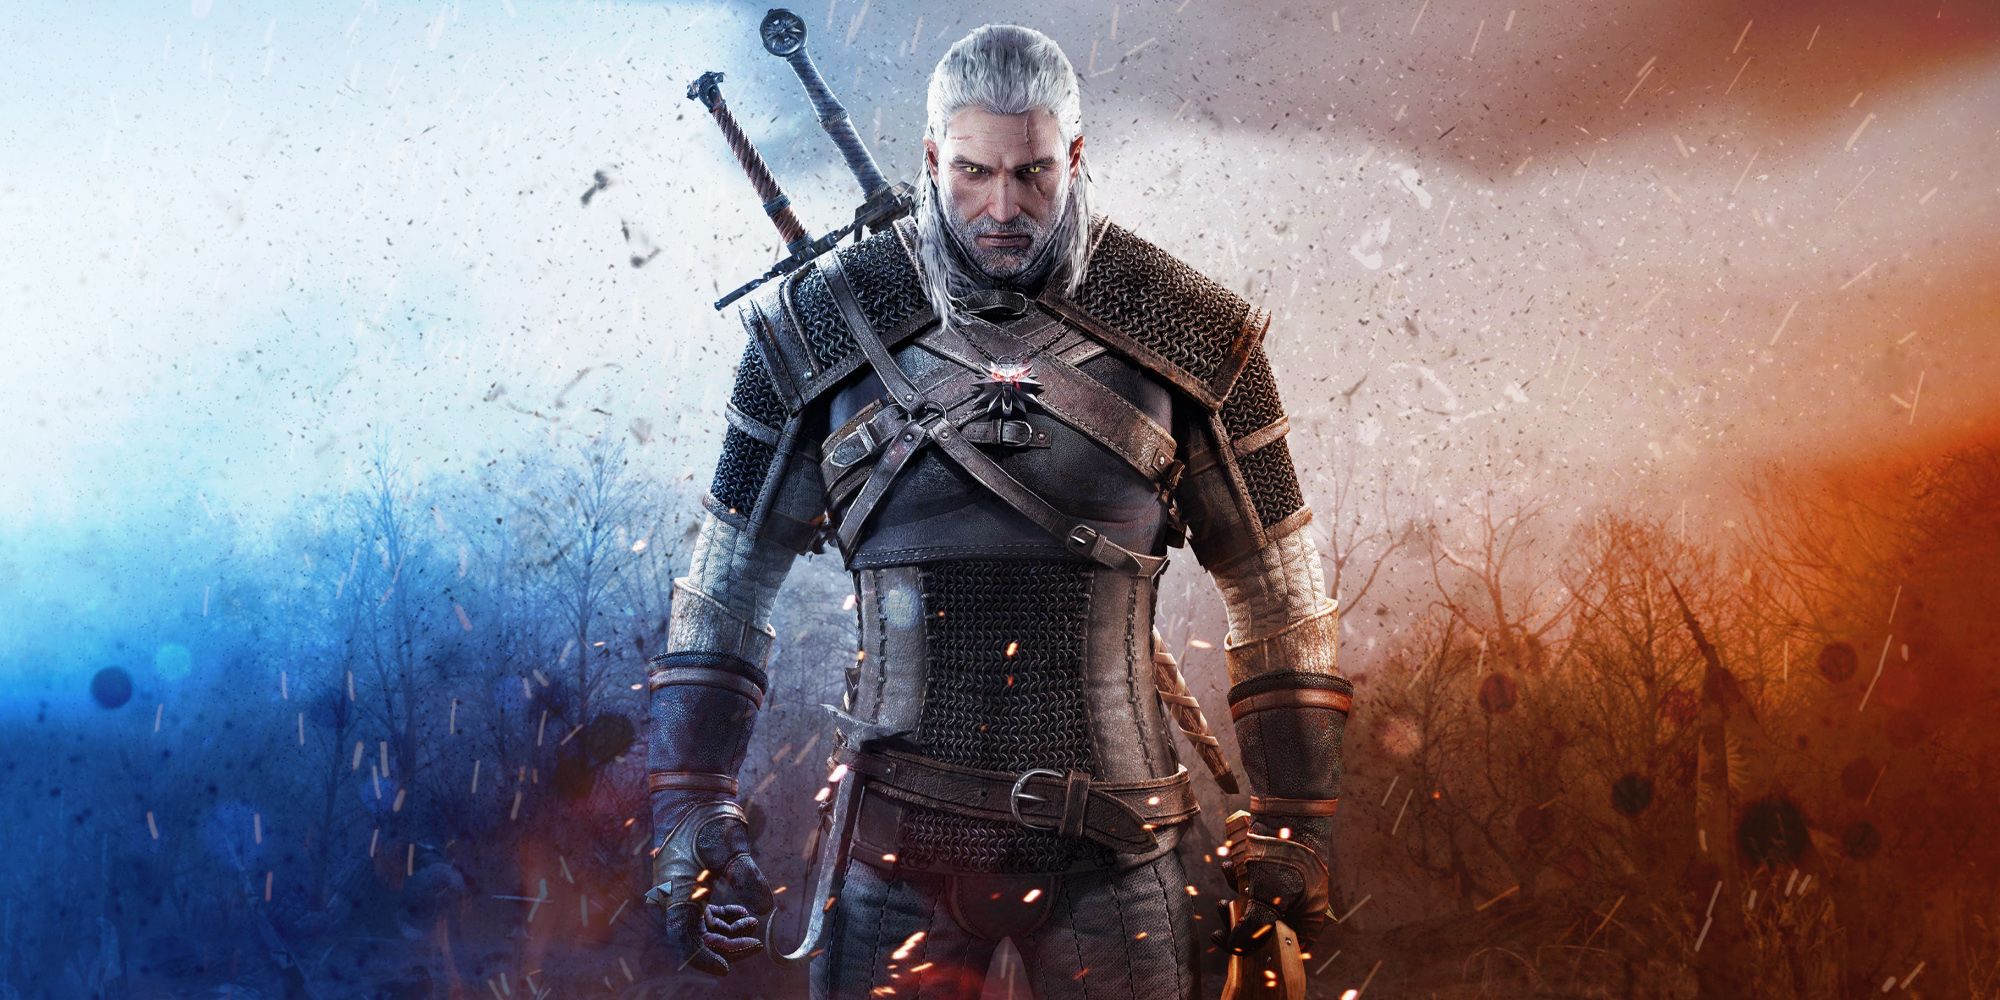 Witcher 3 How To Build Ridiculously Strong Geralt (Weapons, Armor & Stats)